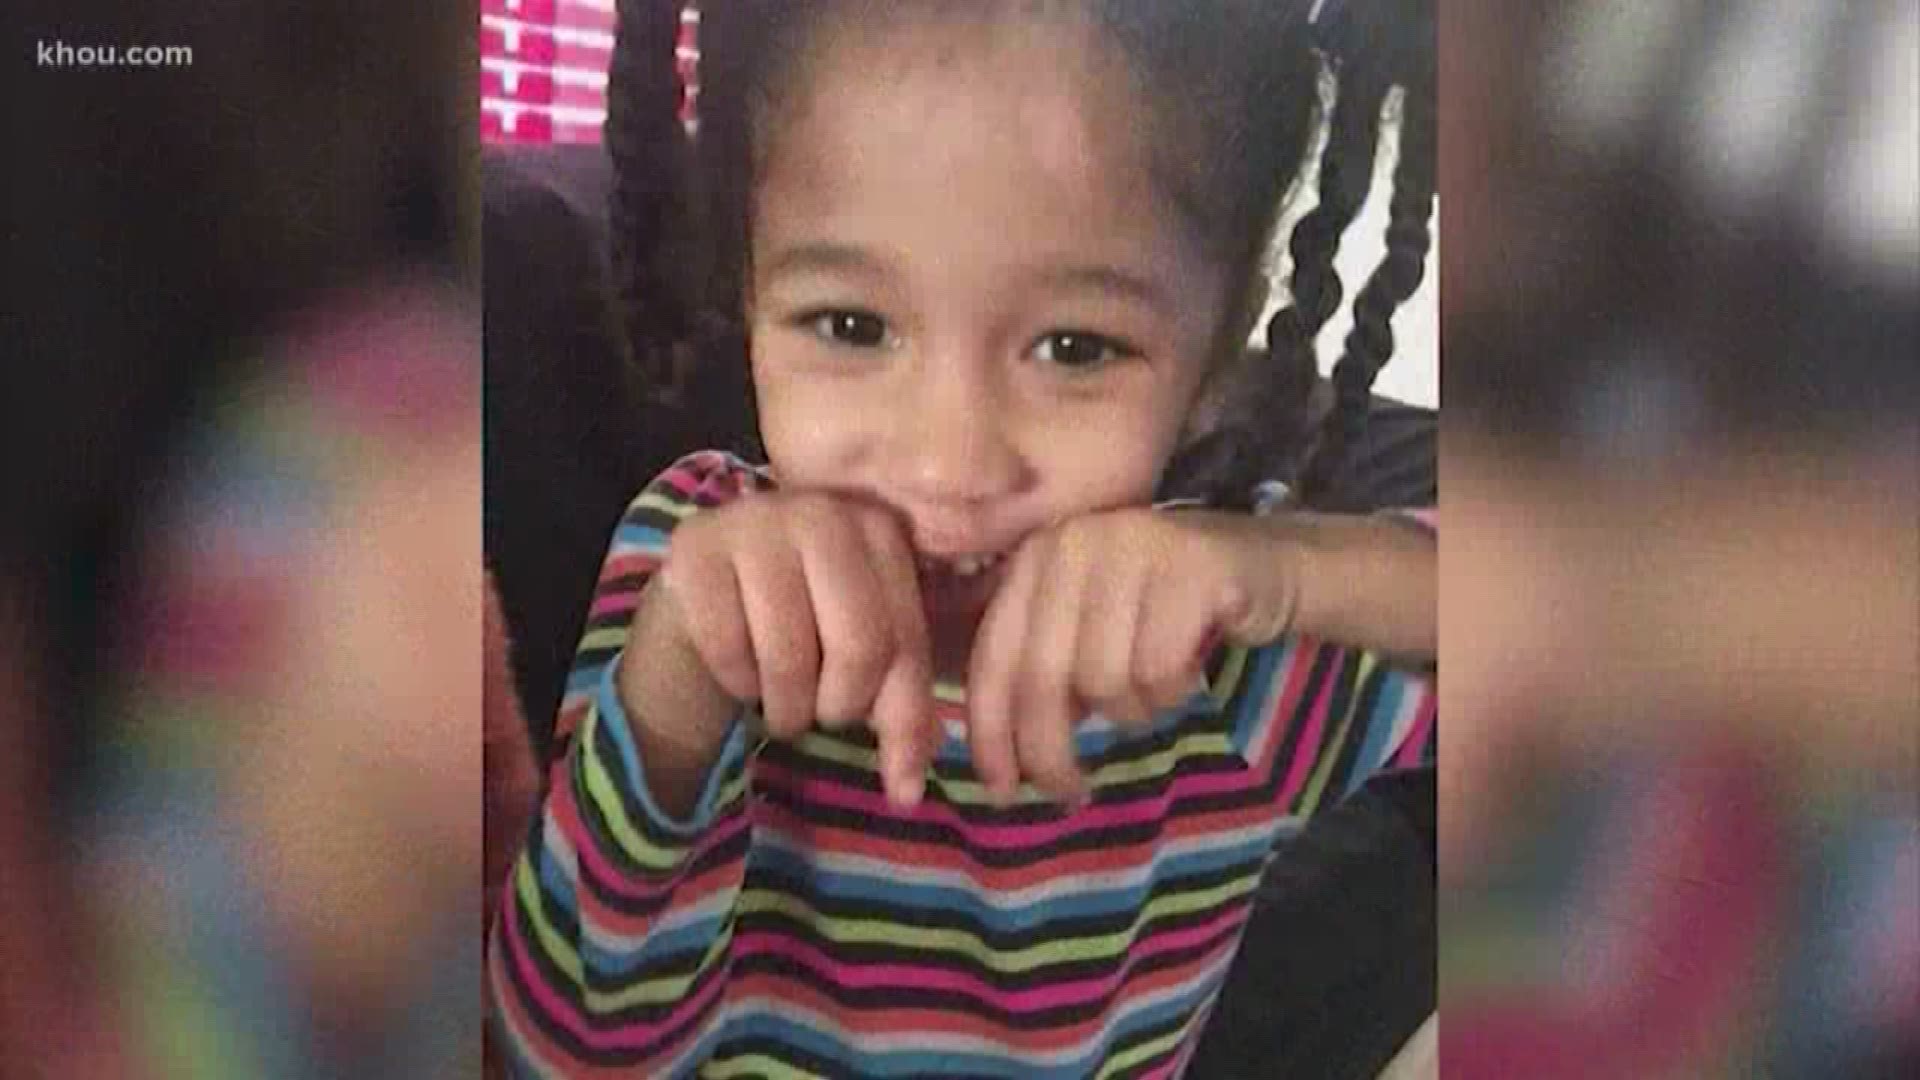 A public false alarm in the search for Maleah Davis upset police and partners at Texas Equusearch whose founder worries what’s next.